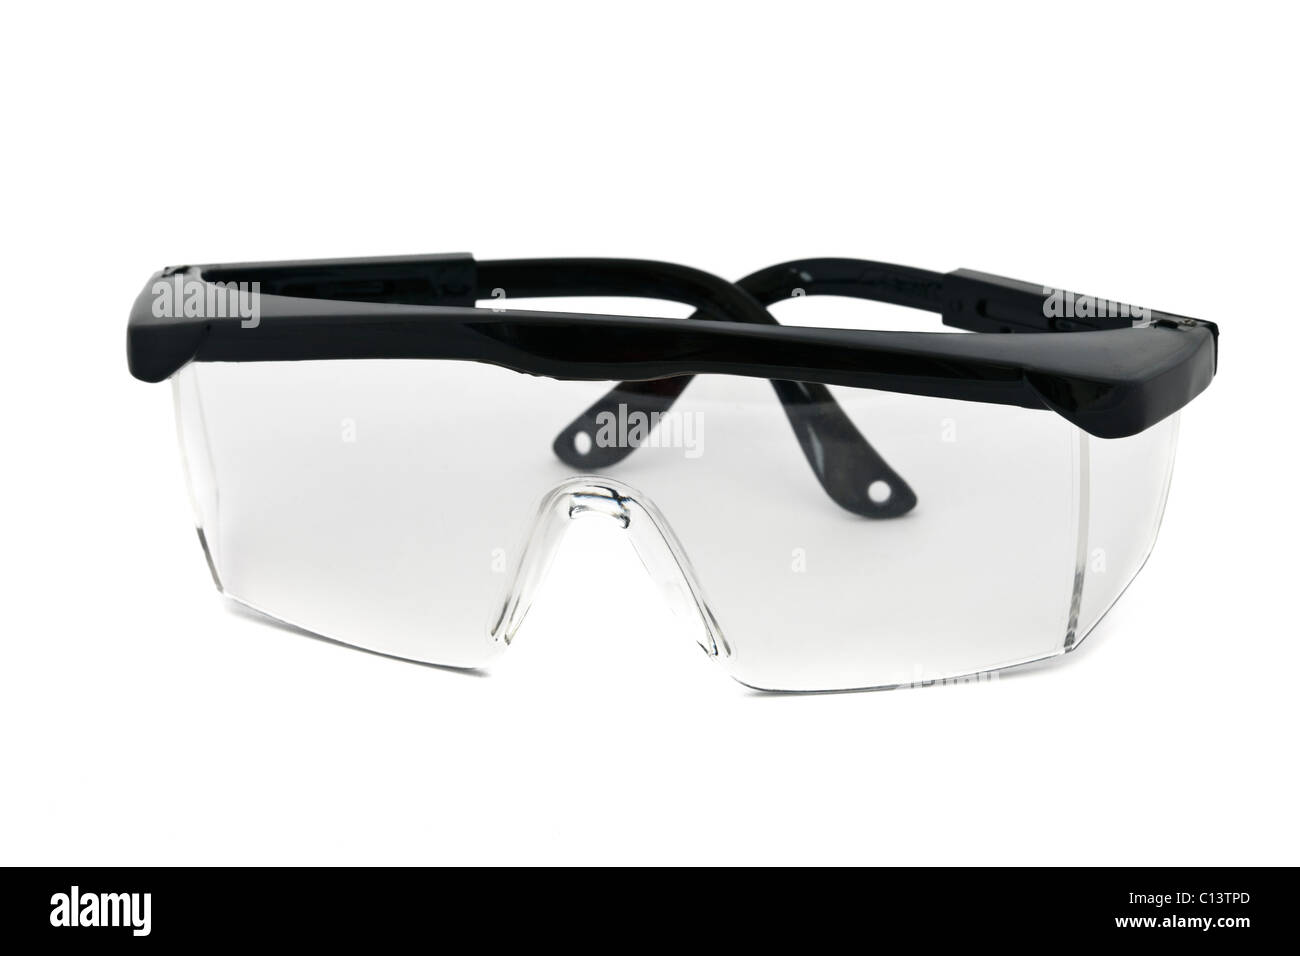 Studio still life. Plastic safety glasses for protecting eyes cut out on a plain white background in close-up Stock Photo